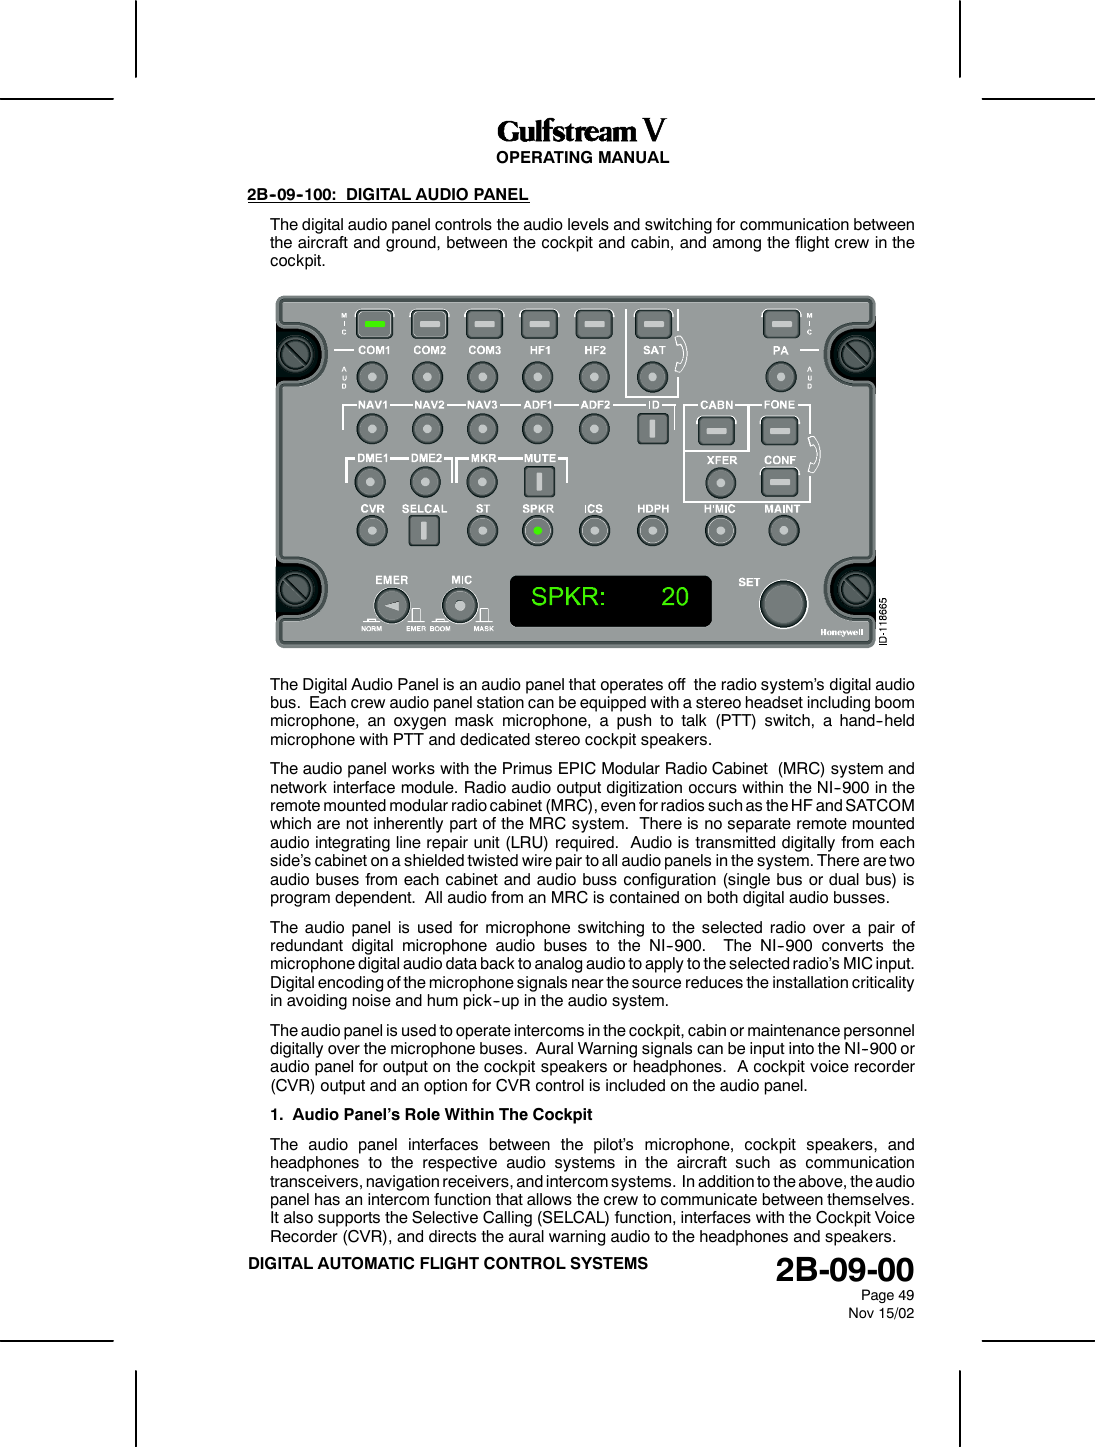 OPERATING MANUAL2B-09-00Page 49Nov 15/02DIGITAL AUTOMATIC FLIGHT CONTROL SYSTEMS2B--09--100: DIGITAL AUDIO PANELThe digital audio panel controls the audio levels and switching for communication betweenthe aircraft and ground, between the cockpit and cabin, and among the flight crew in thecockpit.The Digital Audio Panel is an audio panel that operates off the radio system’s digital audiobus. Each crew audio panel station can be equipped with a stereo headset including boommicrophone, an oxygen mask microphone, a push to talk (PTT) switch, a hand--heldmicrophone with PTT and dedicated stereo cockpit speakers.The audio panel works with the Primus EPIC Modular Radio Cabinet (MRC) system andnetwork interface module. Radio audio output digitization occurs within the NI--900 in theremote mounted modular radio cabinet (MRC), even for radios such as the HF and SATCOMwhich are not inherently part of the MRC system. There is no separate remote mountedaudio integrating line repair unit (LRU) required. Audio is transmitted digitally from eachside’s cabinet on a shielded twisted wire pair to all audio panels in the system. There are twoaudio buses from each cabinet and audio buss configuration (single bus or dual bus) isprogram dependent. All audio from an MRC is contained on both digital audio busses.The audio panel is used for microphone switching to the selected radio over a pair ofredundant digital microphone audio buses to the NI--900. The NI--900 converts themicrophone digital audio data back to analog audio to apply to the selected radio’s MIC input.Digital encoding of the microphone signals near the source reduces the installation criticalityin avoiding noise and hum pick--up in the audio system.The audio panel is used to operate intercoms in the cockpit, cabin or maintenance personneldigitally over the microphone buses. Aural Warning signals can be input into the NI--900 oraudio panel for output on the cockpit speakers or headphones. A cockpit voice recorder(CVR) output and an option for CVR control is included on the audio panel.1. Audio Panel’s Role Within The CockpitThe audio panel interfaces between the pilot’s microphone, cockpit speakers, andheadphones to the respective audio systems in the aircraft such as communicationtransceivers, navigation receivers, and intercom systems. In addition to the above, the audiopanel has an intercom function that allows the crew to communicate between themselves.It also supports the Selective Calling (SELCAL) function, interfaces with the Cockpit VoiceRecorder (CVR), and directs the aural warning audio to the headphones and speakers.